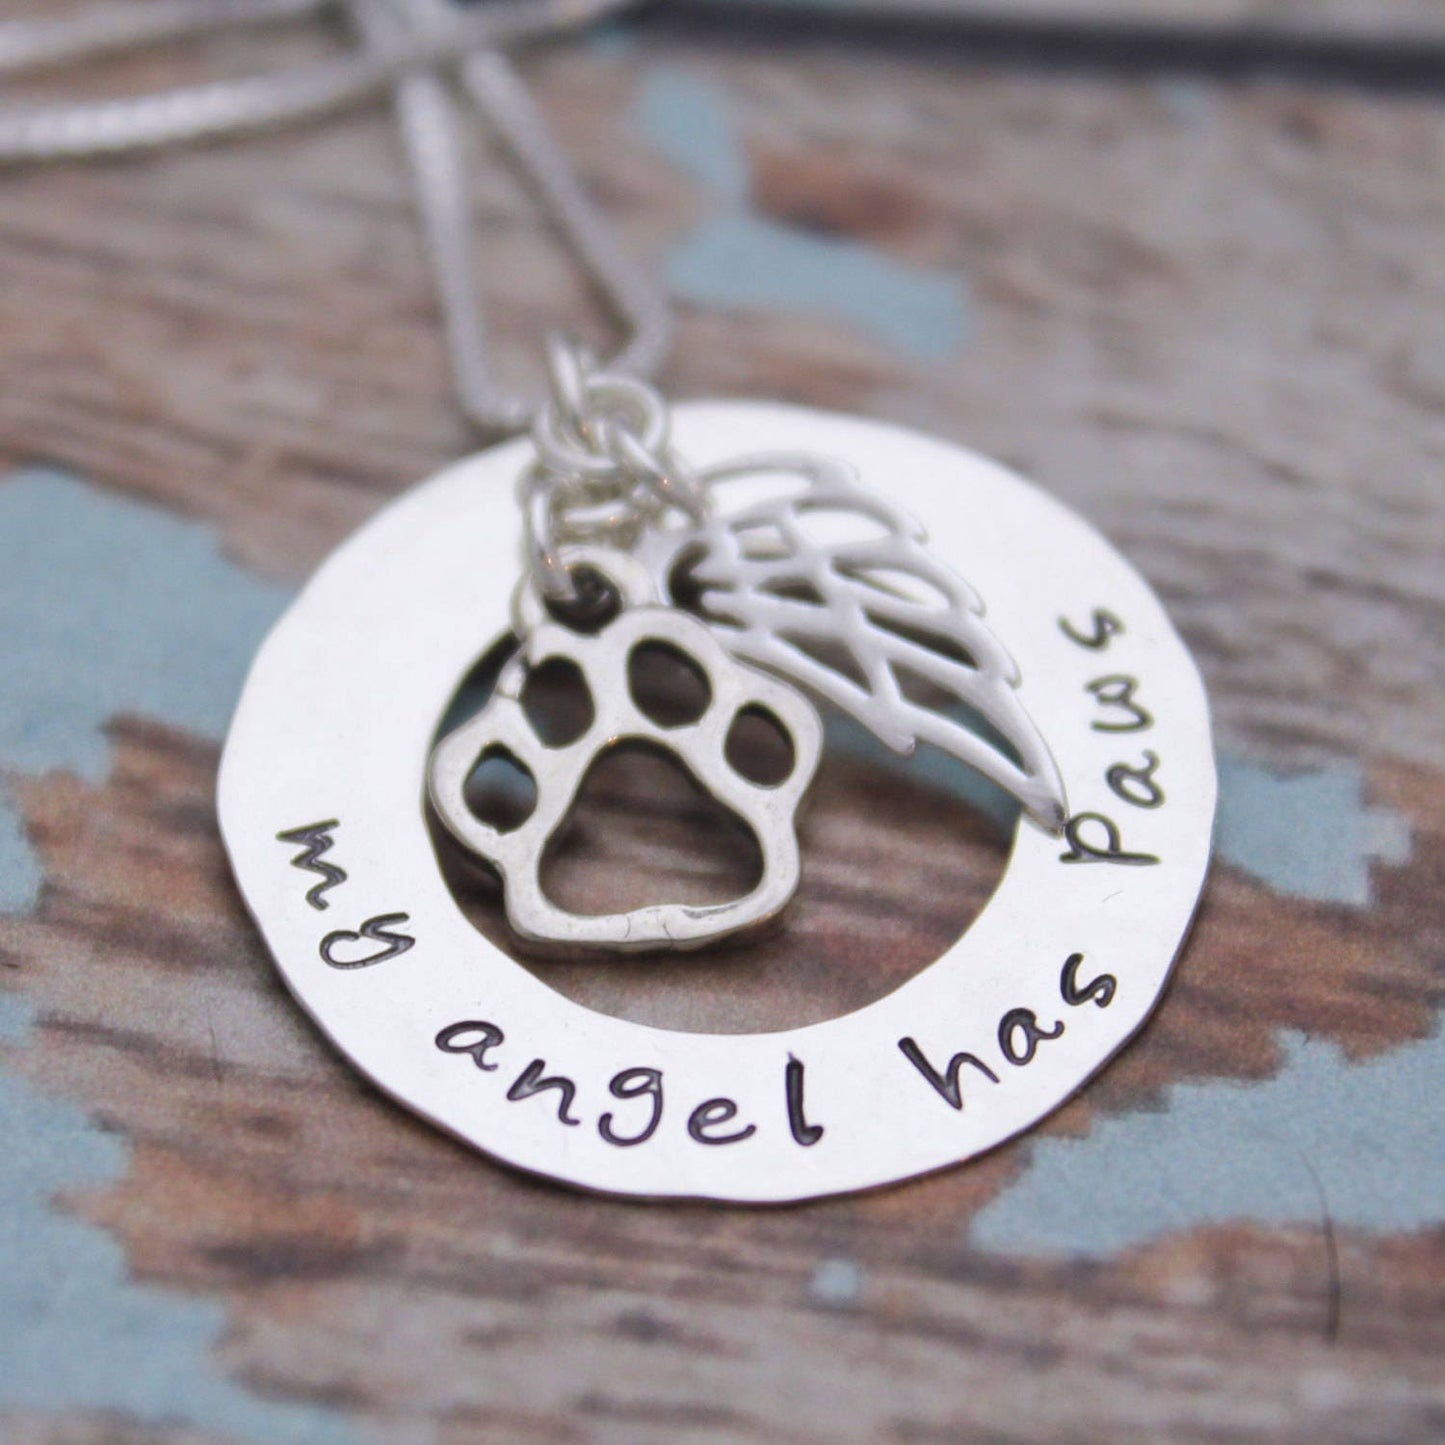 My Angel Has Paws Necklace, Pet Remembrance Jewelry, Pet Memorial Jewelry, Sterling Silver Angel Wing & Paw, Pet Loss Necklace, Hand Stamped